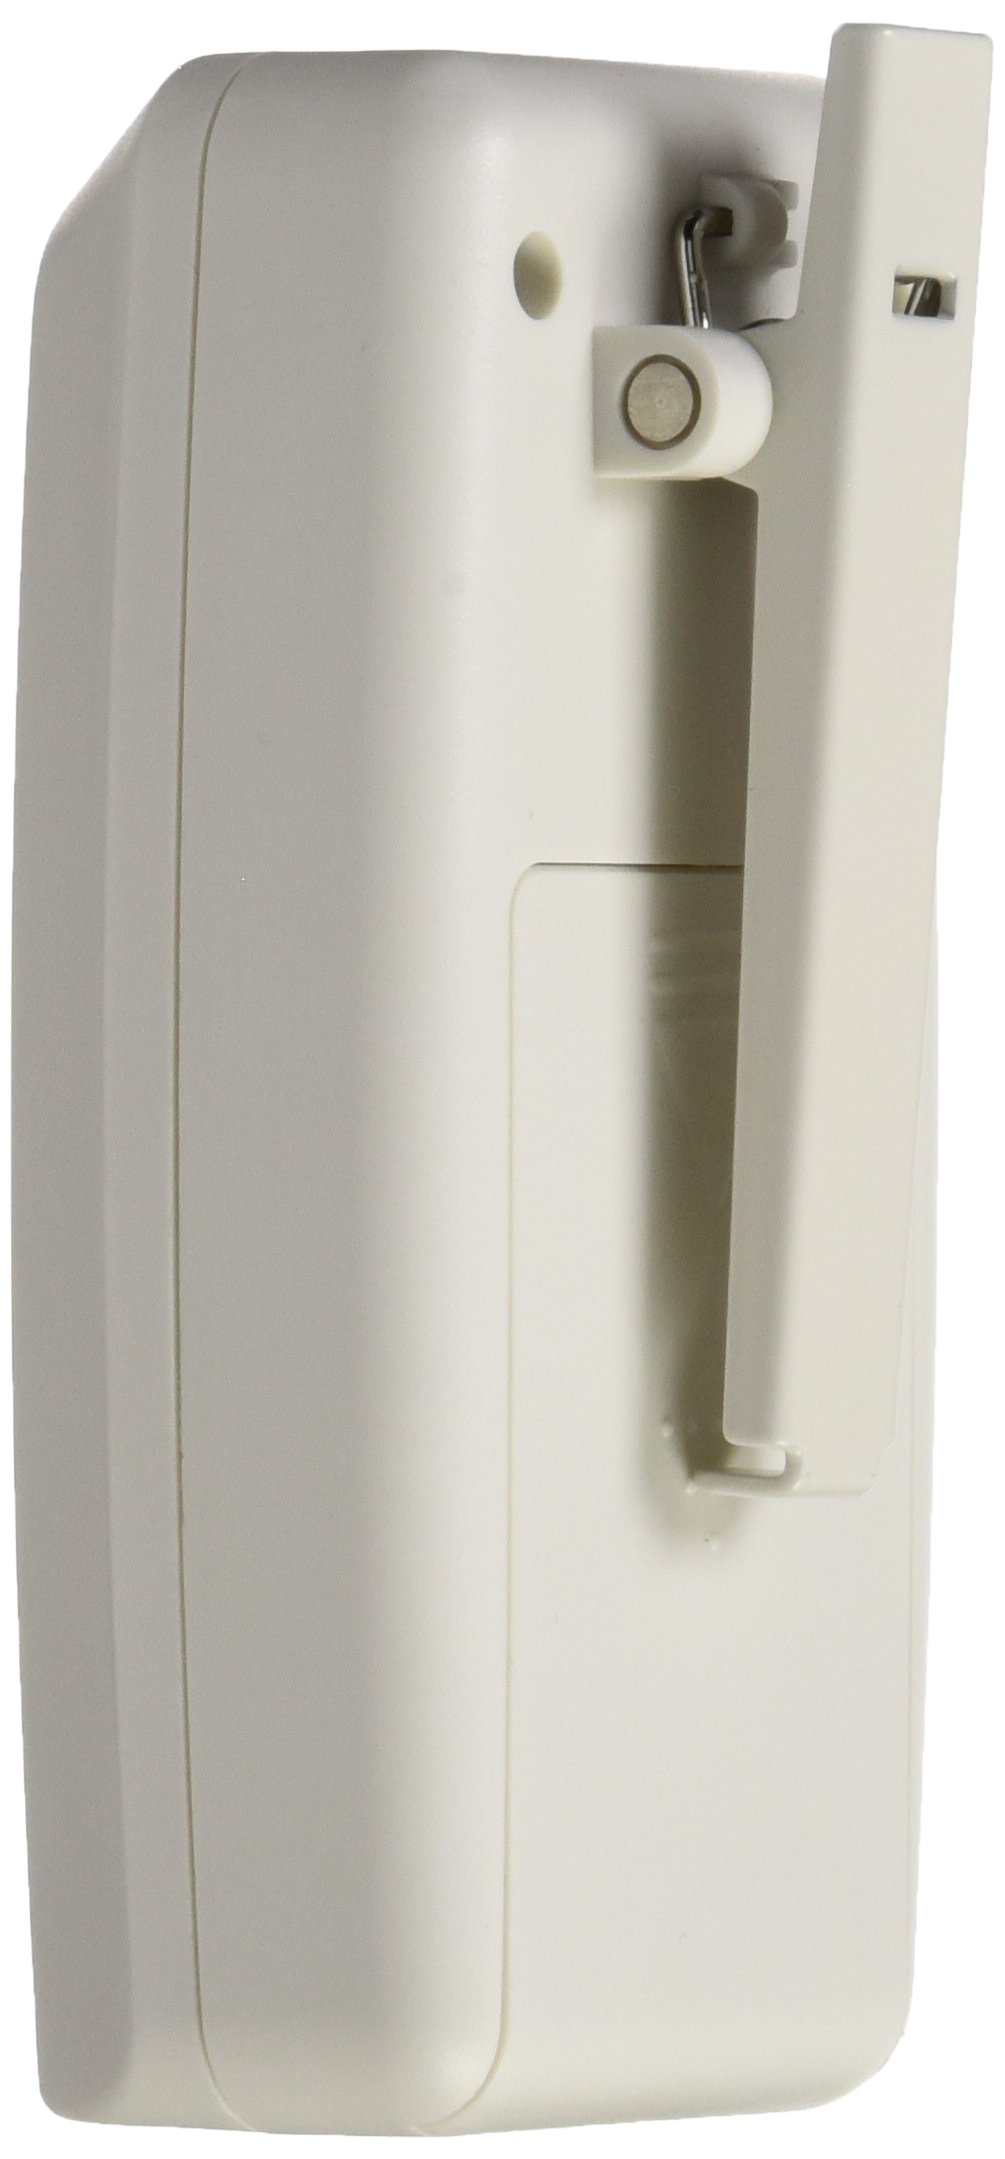 Sammons Preston Magnet Alarm, Fall Management System for Elderly Residents, Aid for Monitoring Patients in Bed or in Wheelchairs, Alarm System for Assisted Living Residents and Elderly Care